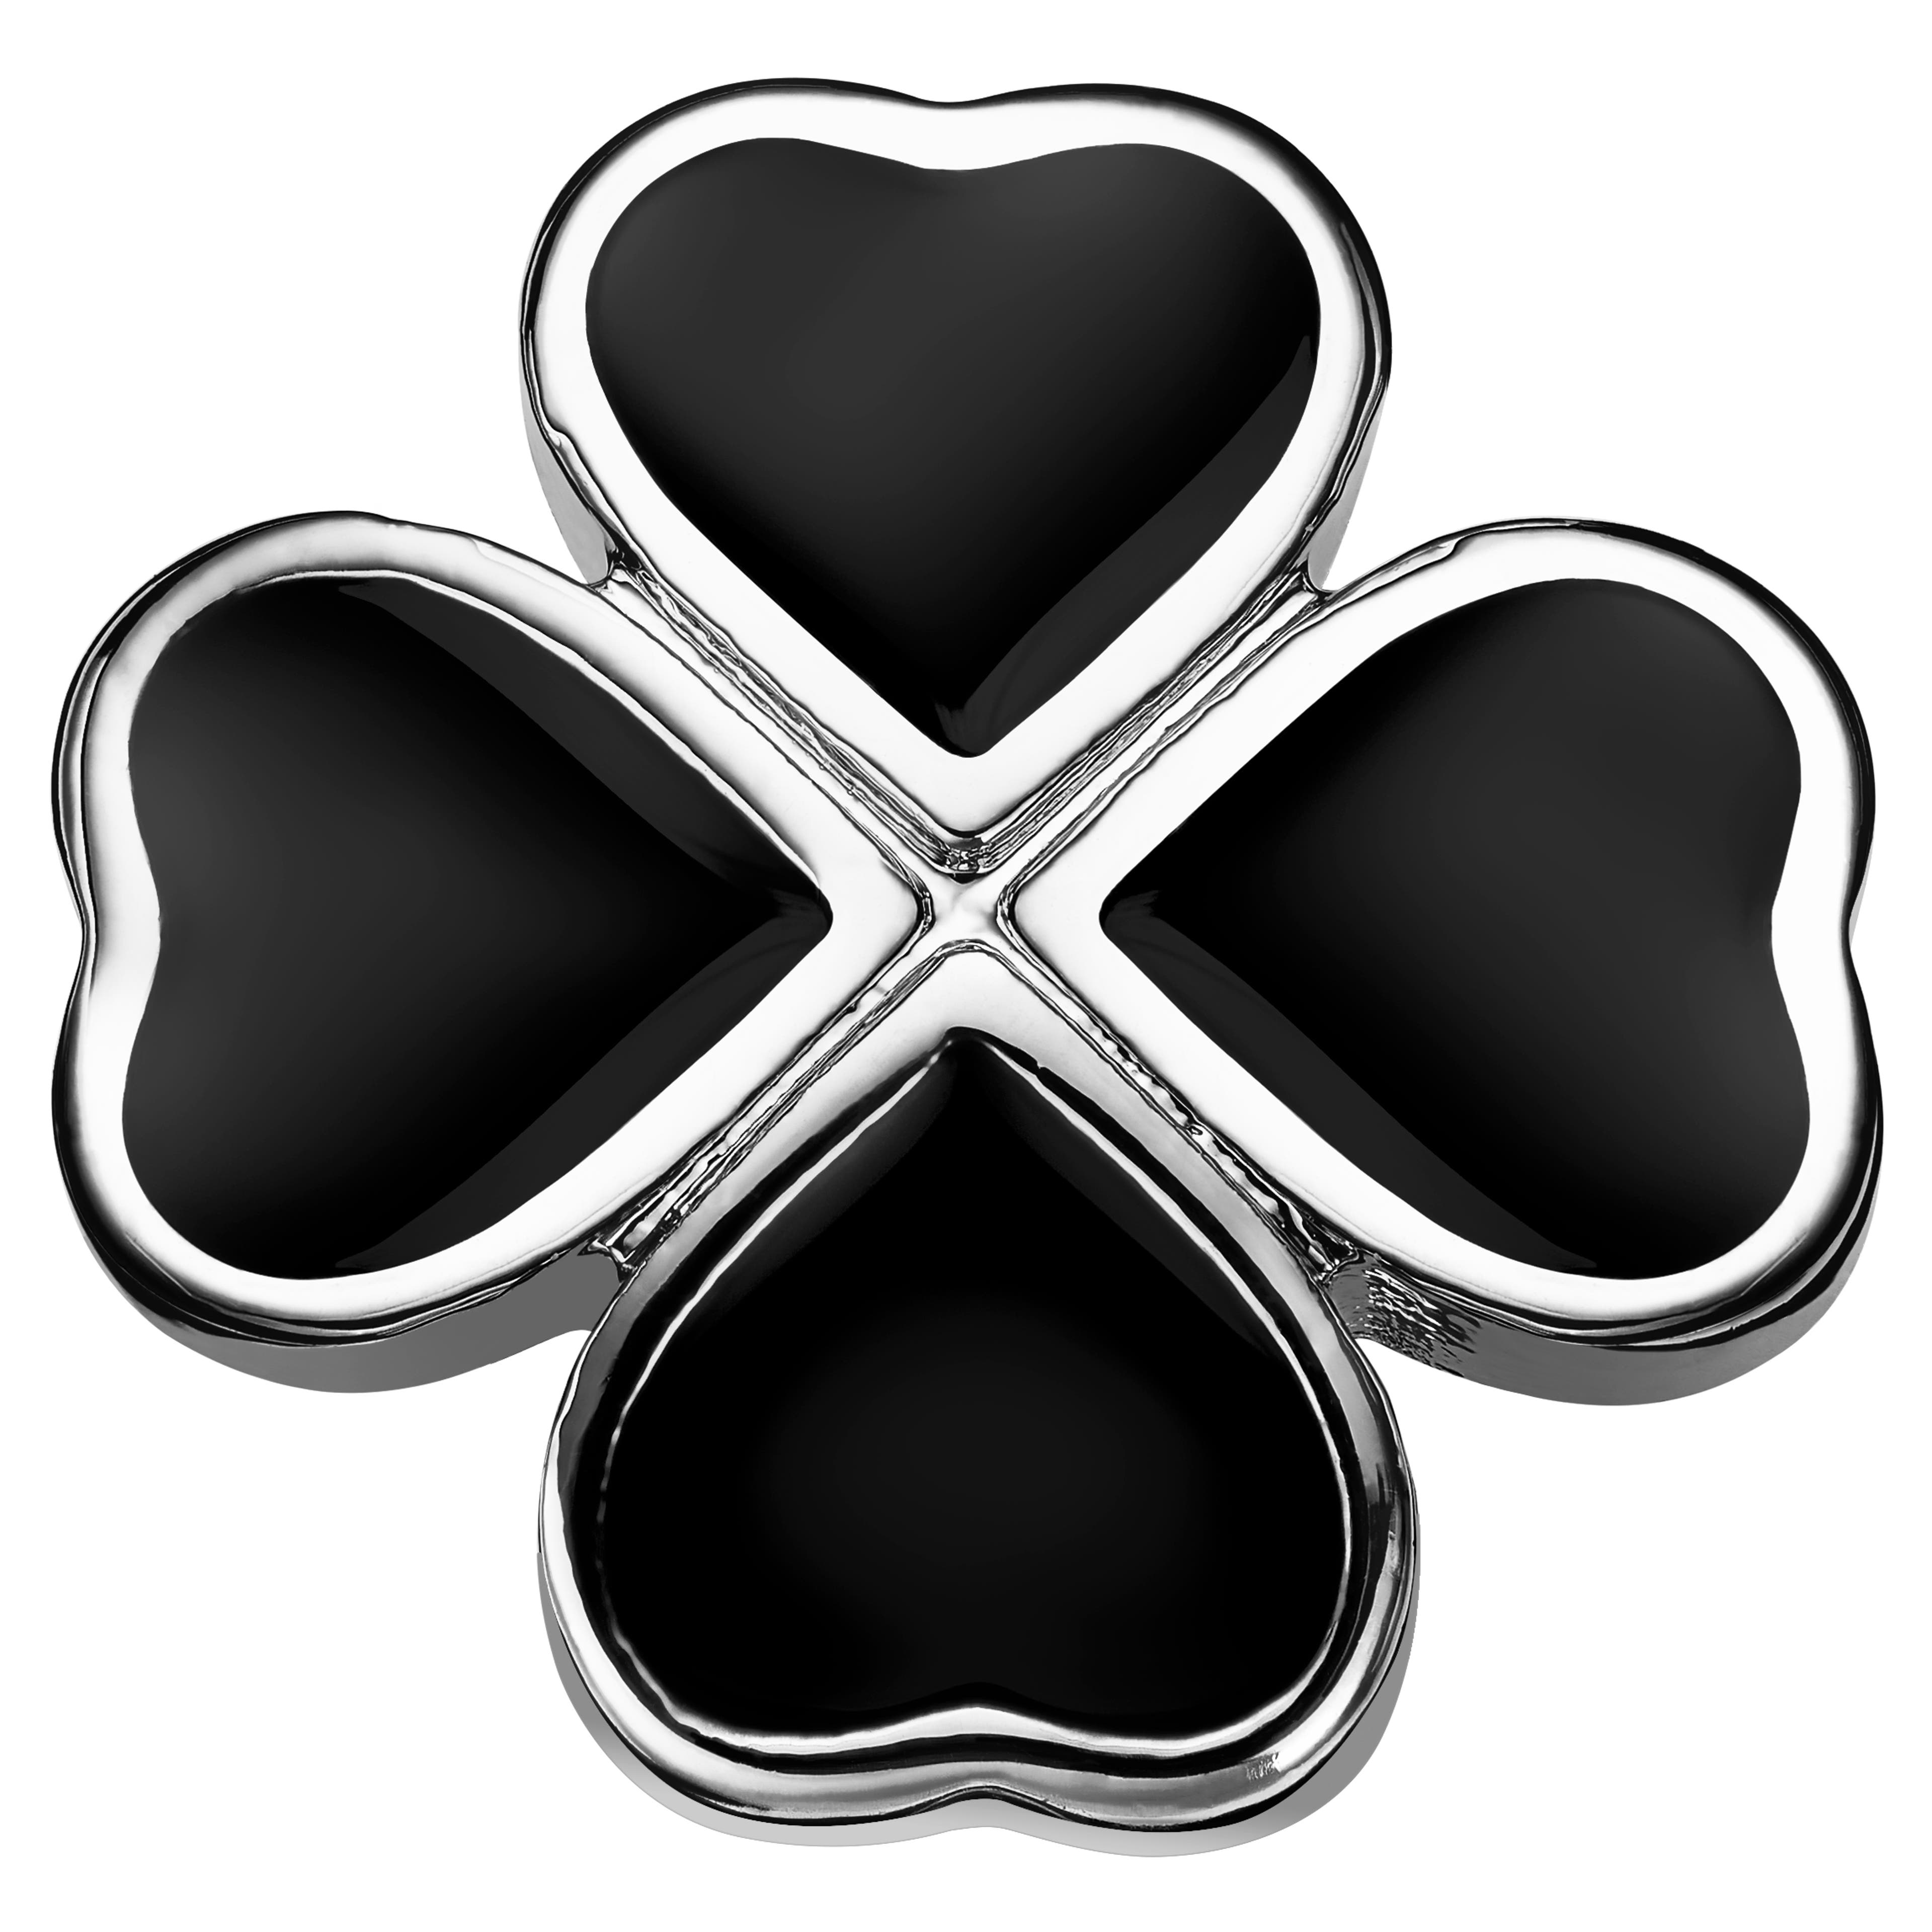 Dianthus | Silver-Tone and Black Four-Leaf Clover Lapel Pin